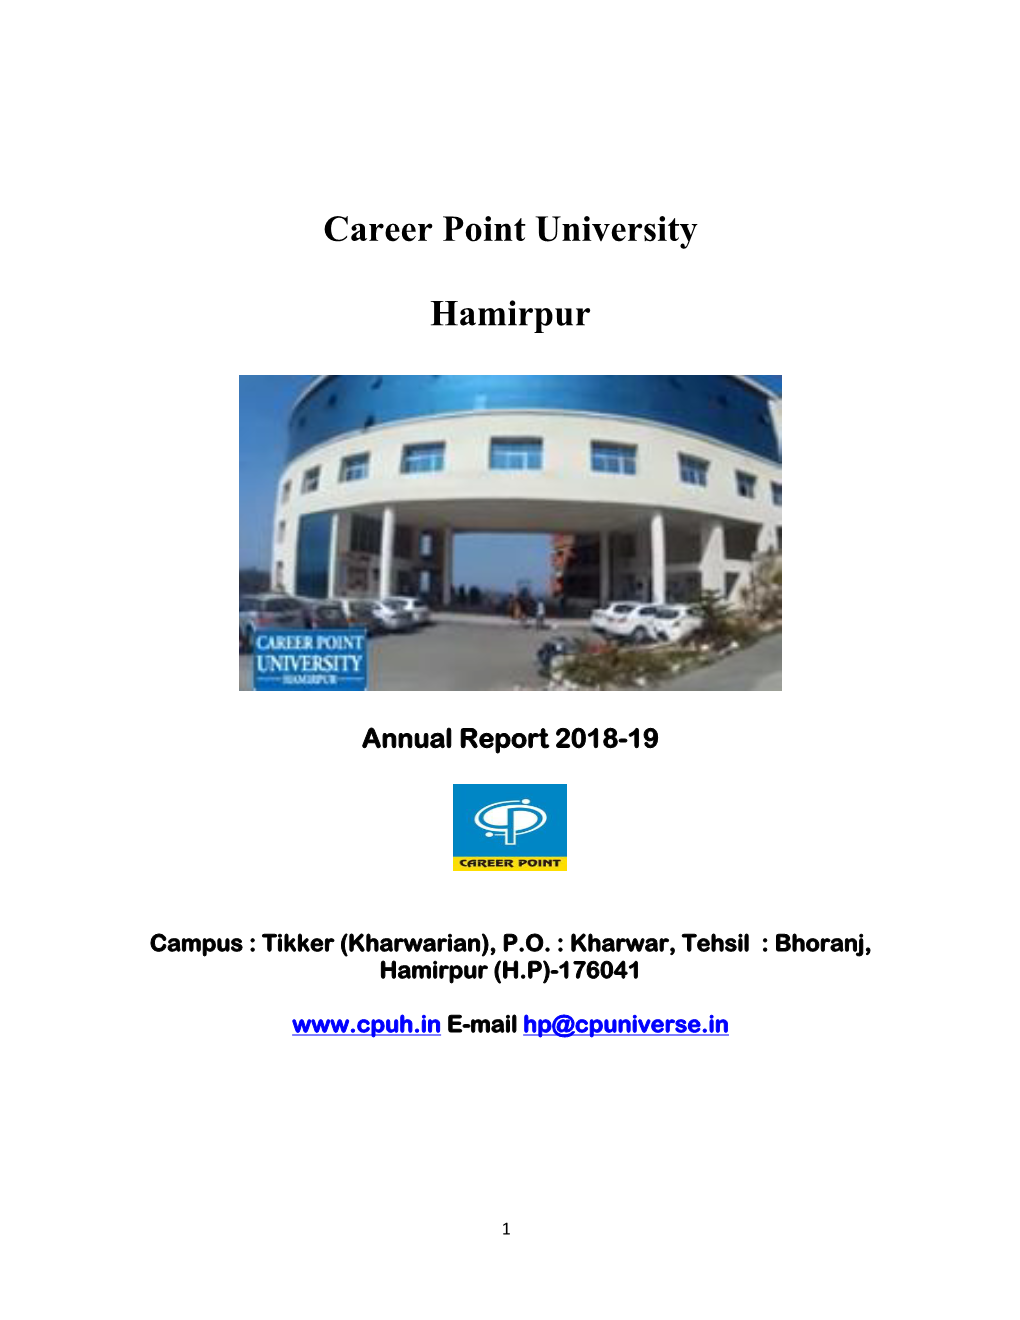 Career Point University Hamirpur Was Established by the Himachal Pradesh Government Vide Act No